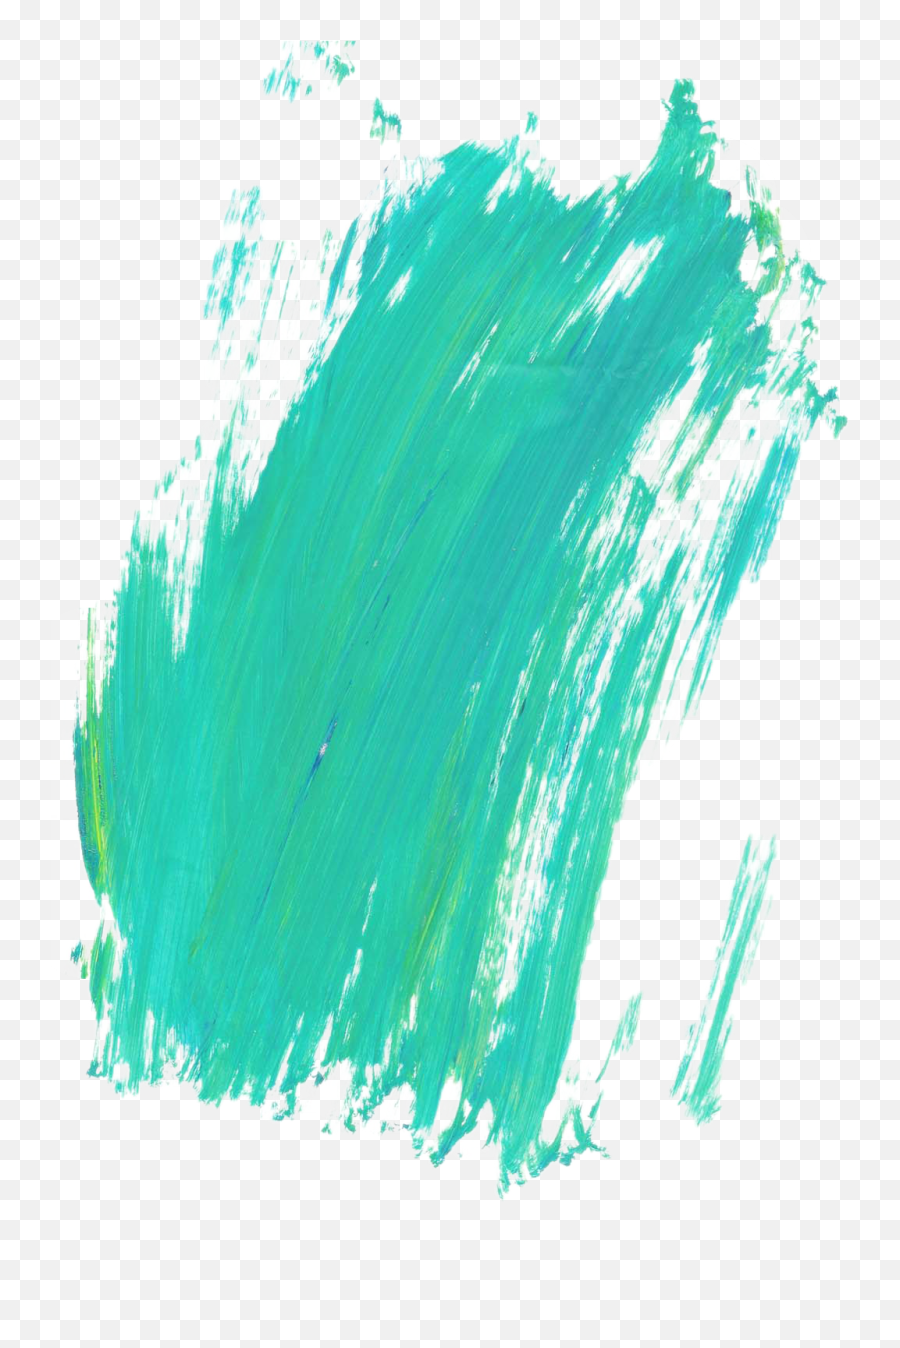 Blue - Brush Stroke Painting Png,Stain Png